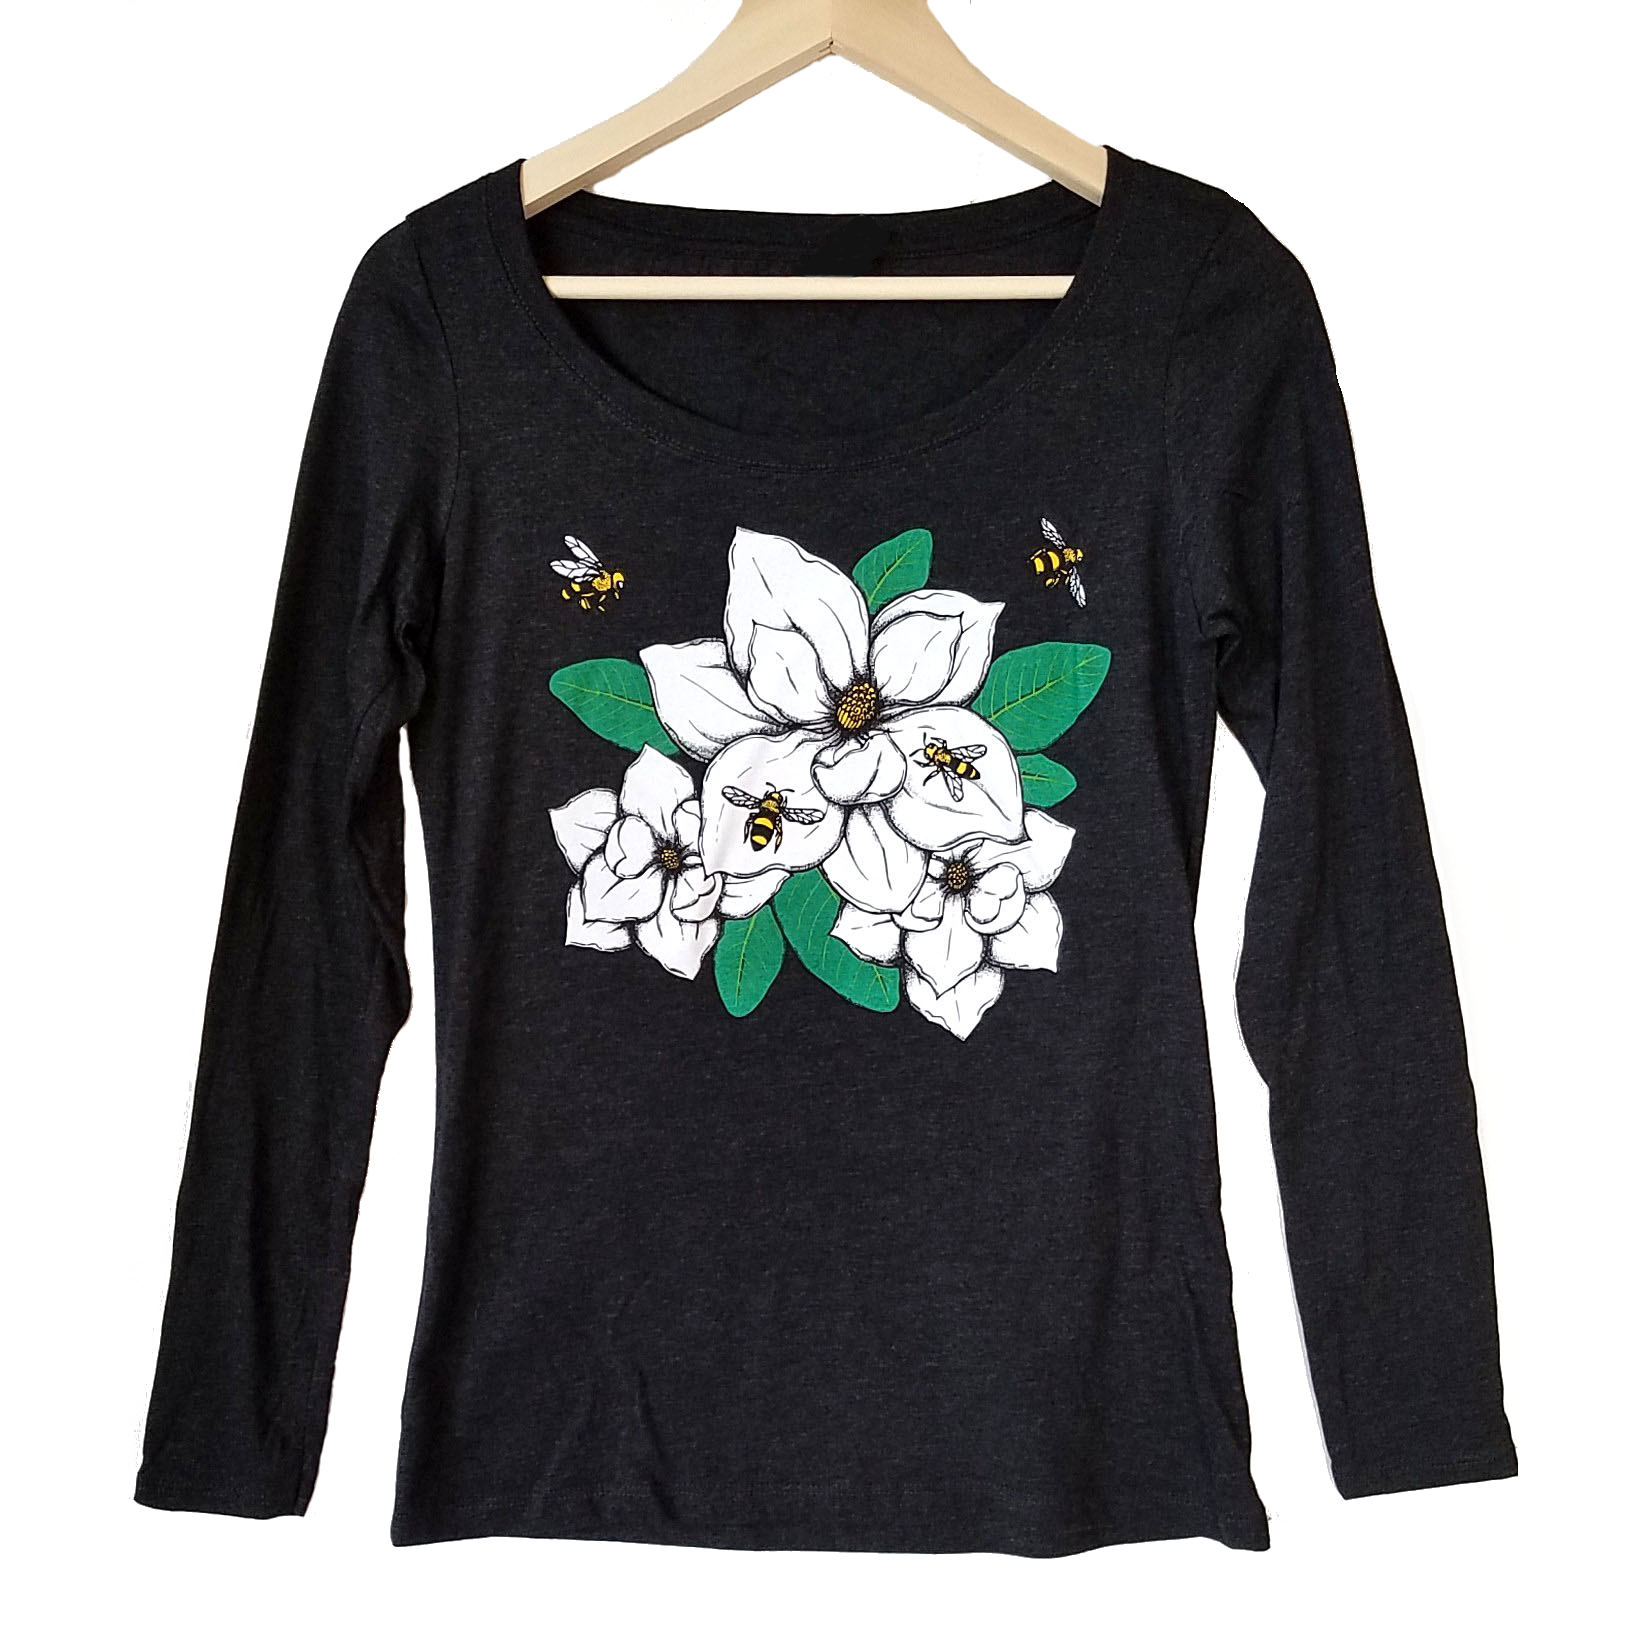 Magnolia & Honey Bees Women's T-shirt. Stay warm this fall with our gorgeous new long sleeve shirts. Featuring our new original design that captures the beauty of the Southern Magnolia and bees collecting pollen. So realistic, you can smell the sweetness.   Buttery soft triblend, preshrunk, true to size.  We gift a package of pollinator wildflower seeds with every shirt purchase. Help provide nectar, pollen and shelter to our beloved pollinators.   We Love Bees!!